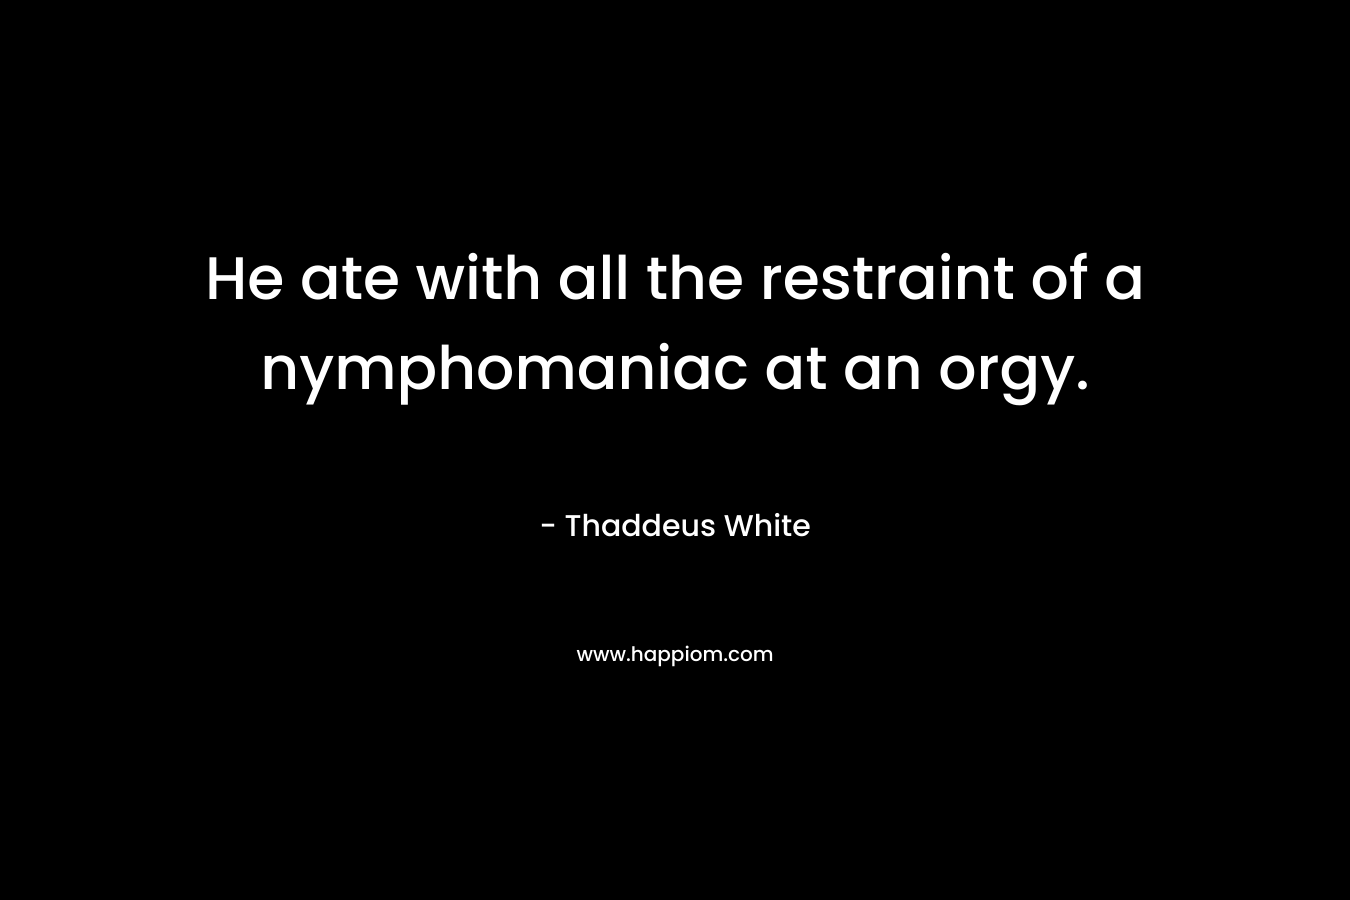 He ate with all the restraint of a nymphomaniac at an orgy. – Thaddeus White